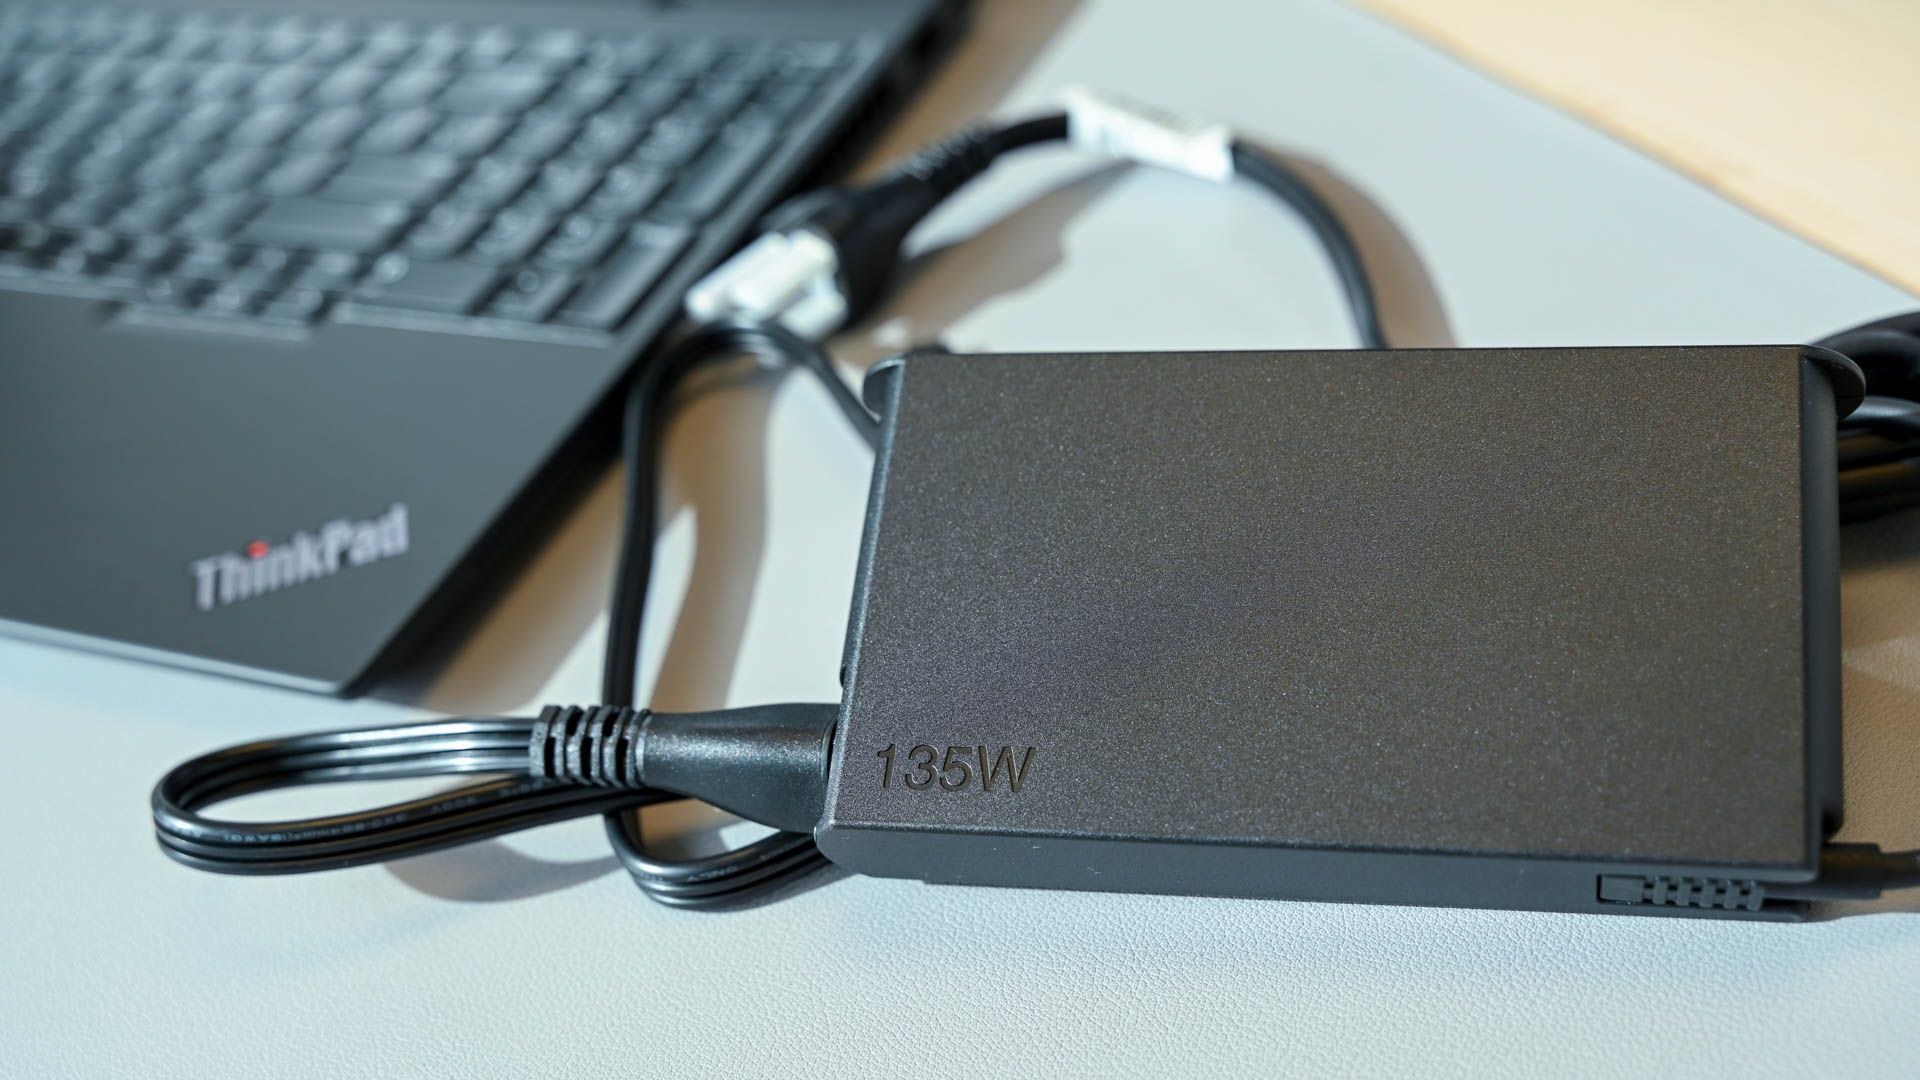 The Lenovo ThinkPad T16 Gen 1's 135W charger.